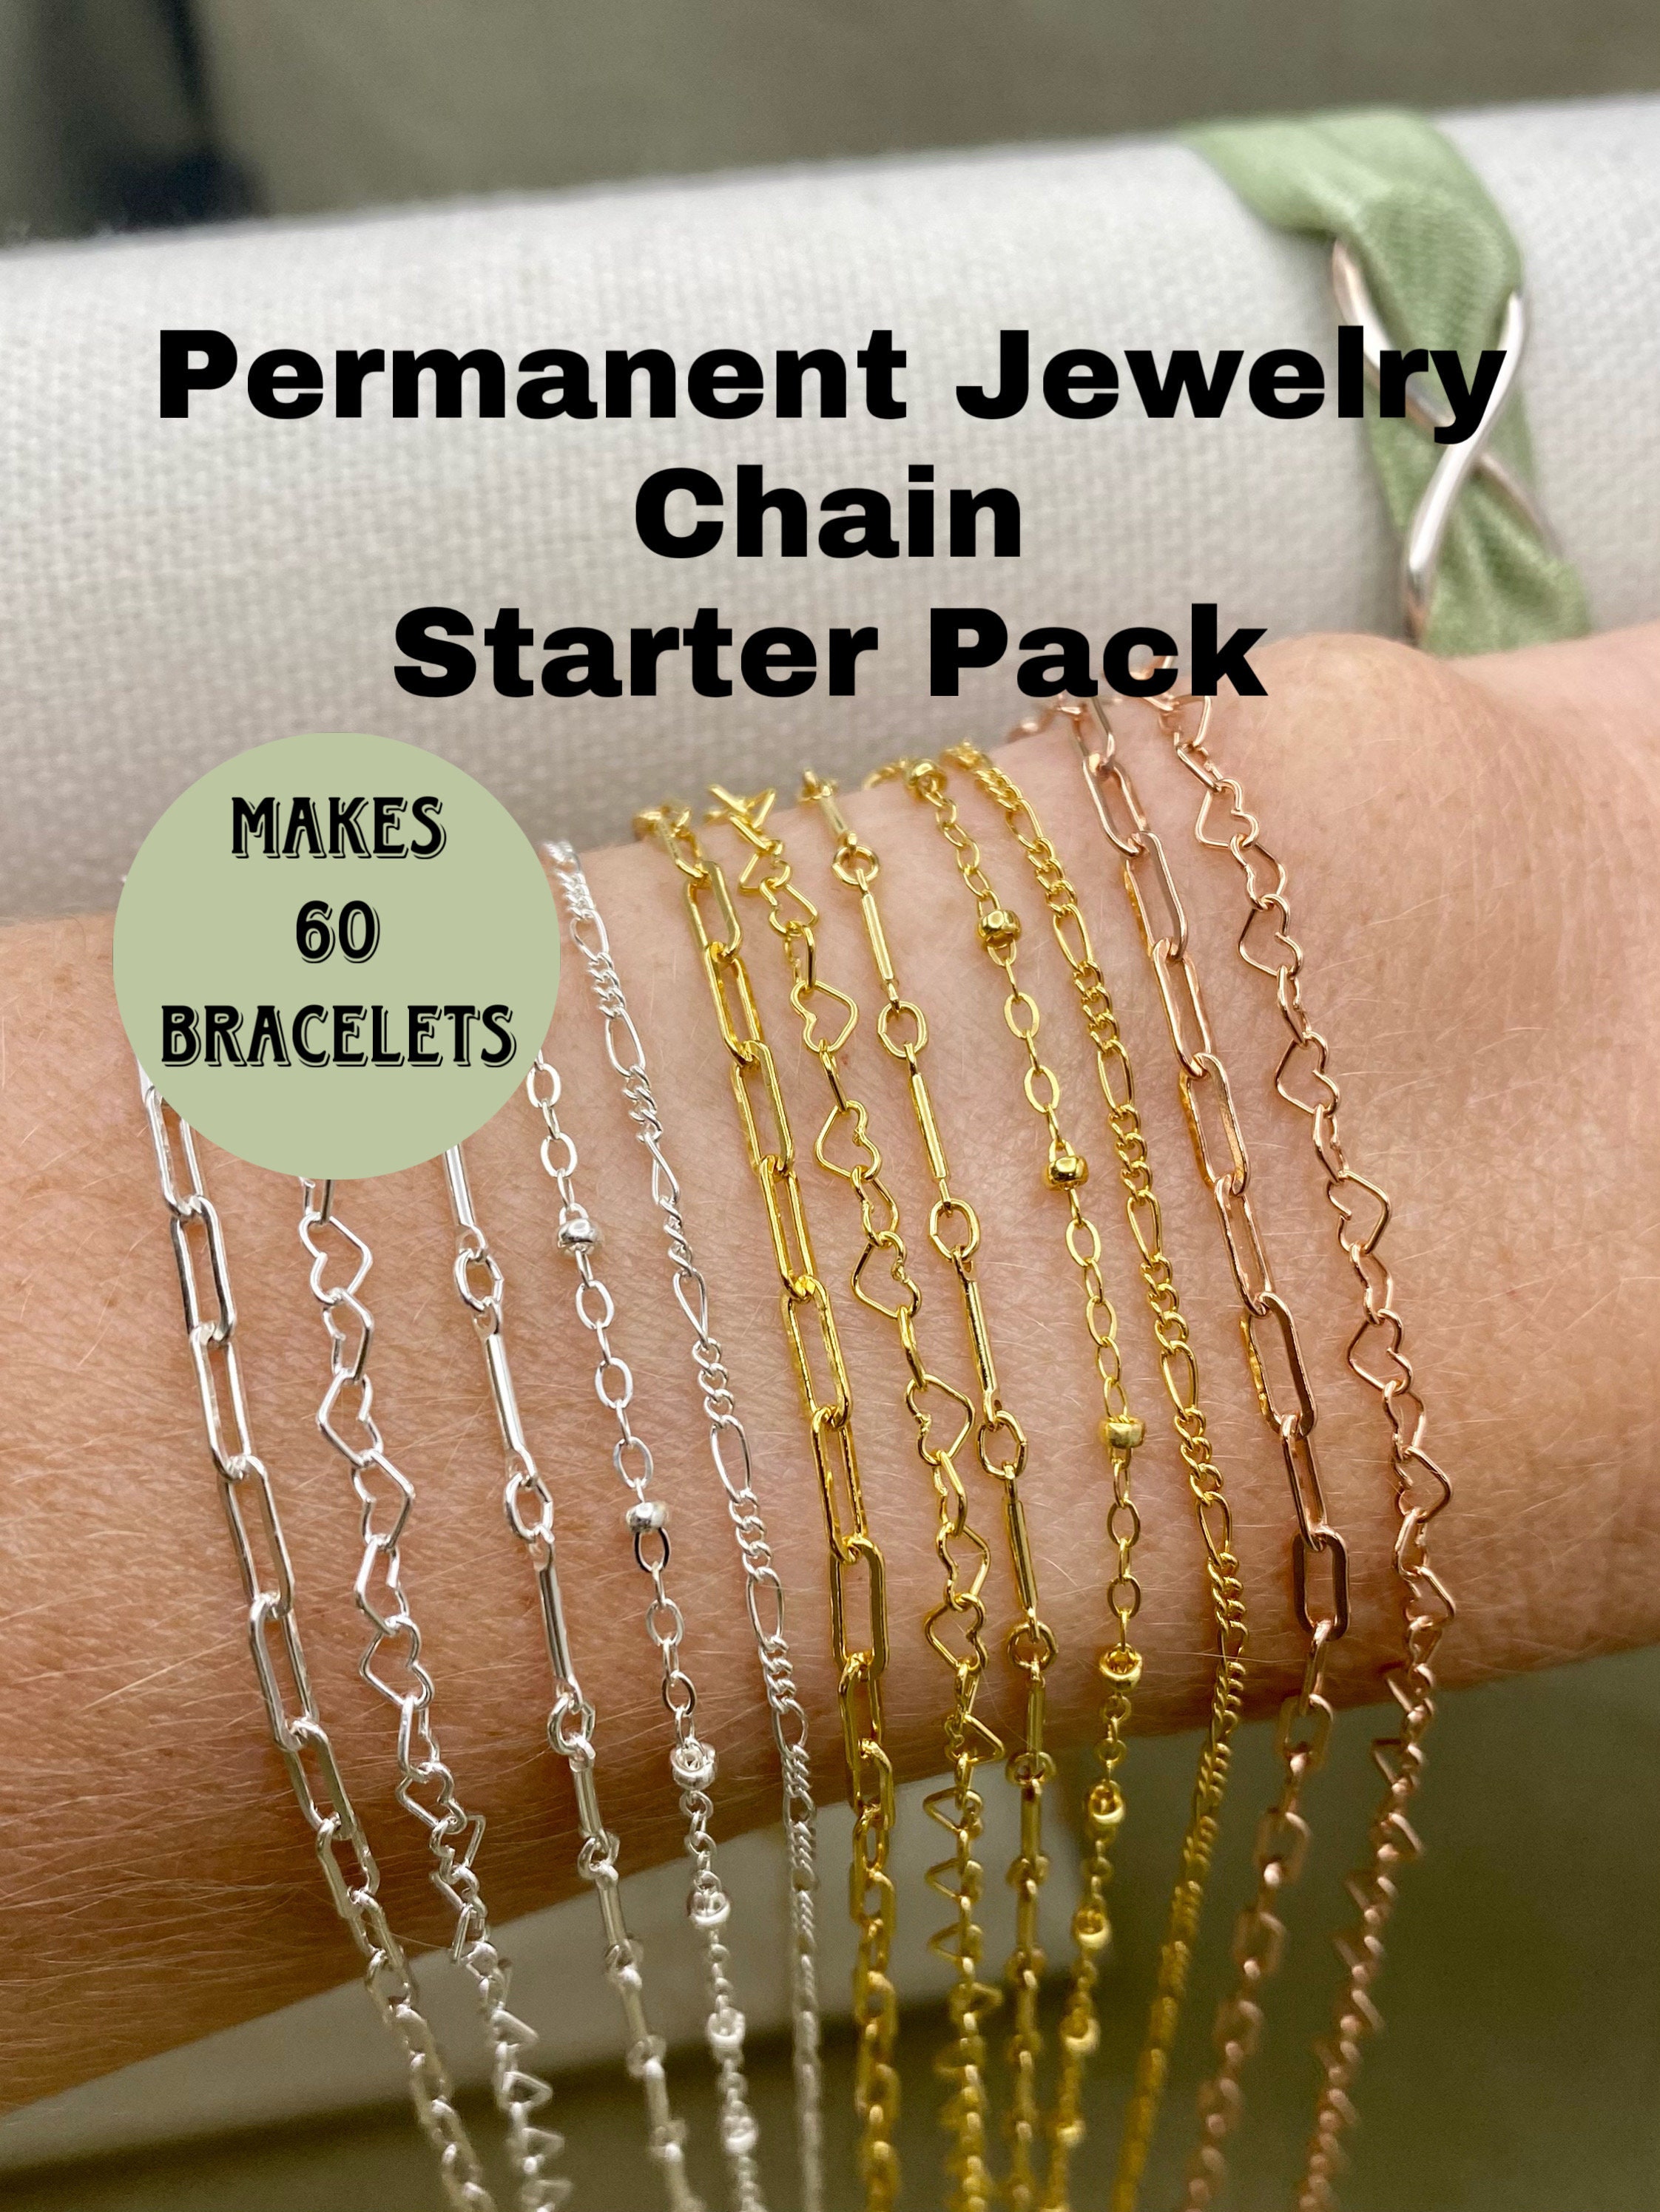 Permanent Jewelry Chain Starter Pack the CLASSIC Kit 12 Chains for